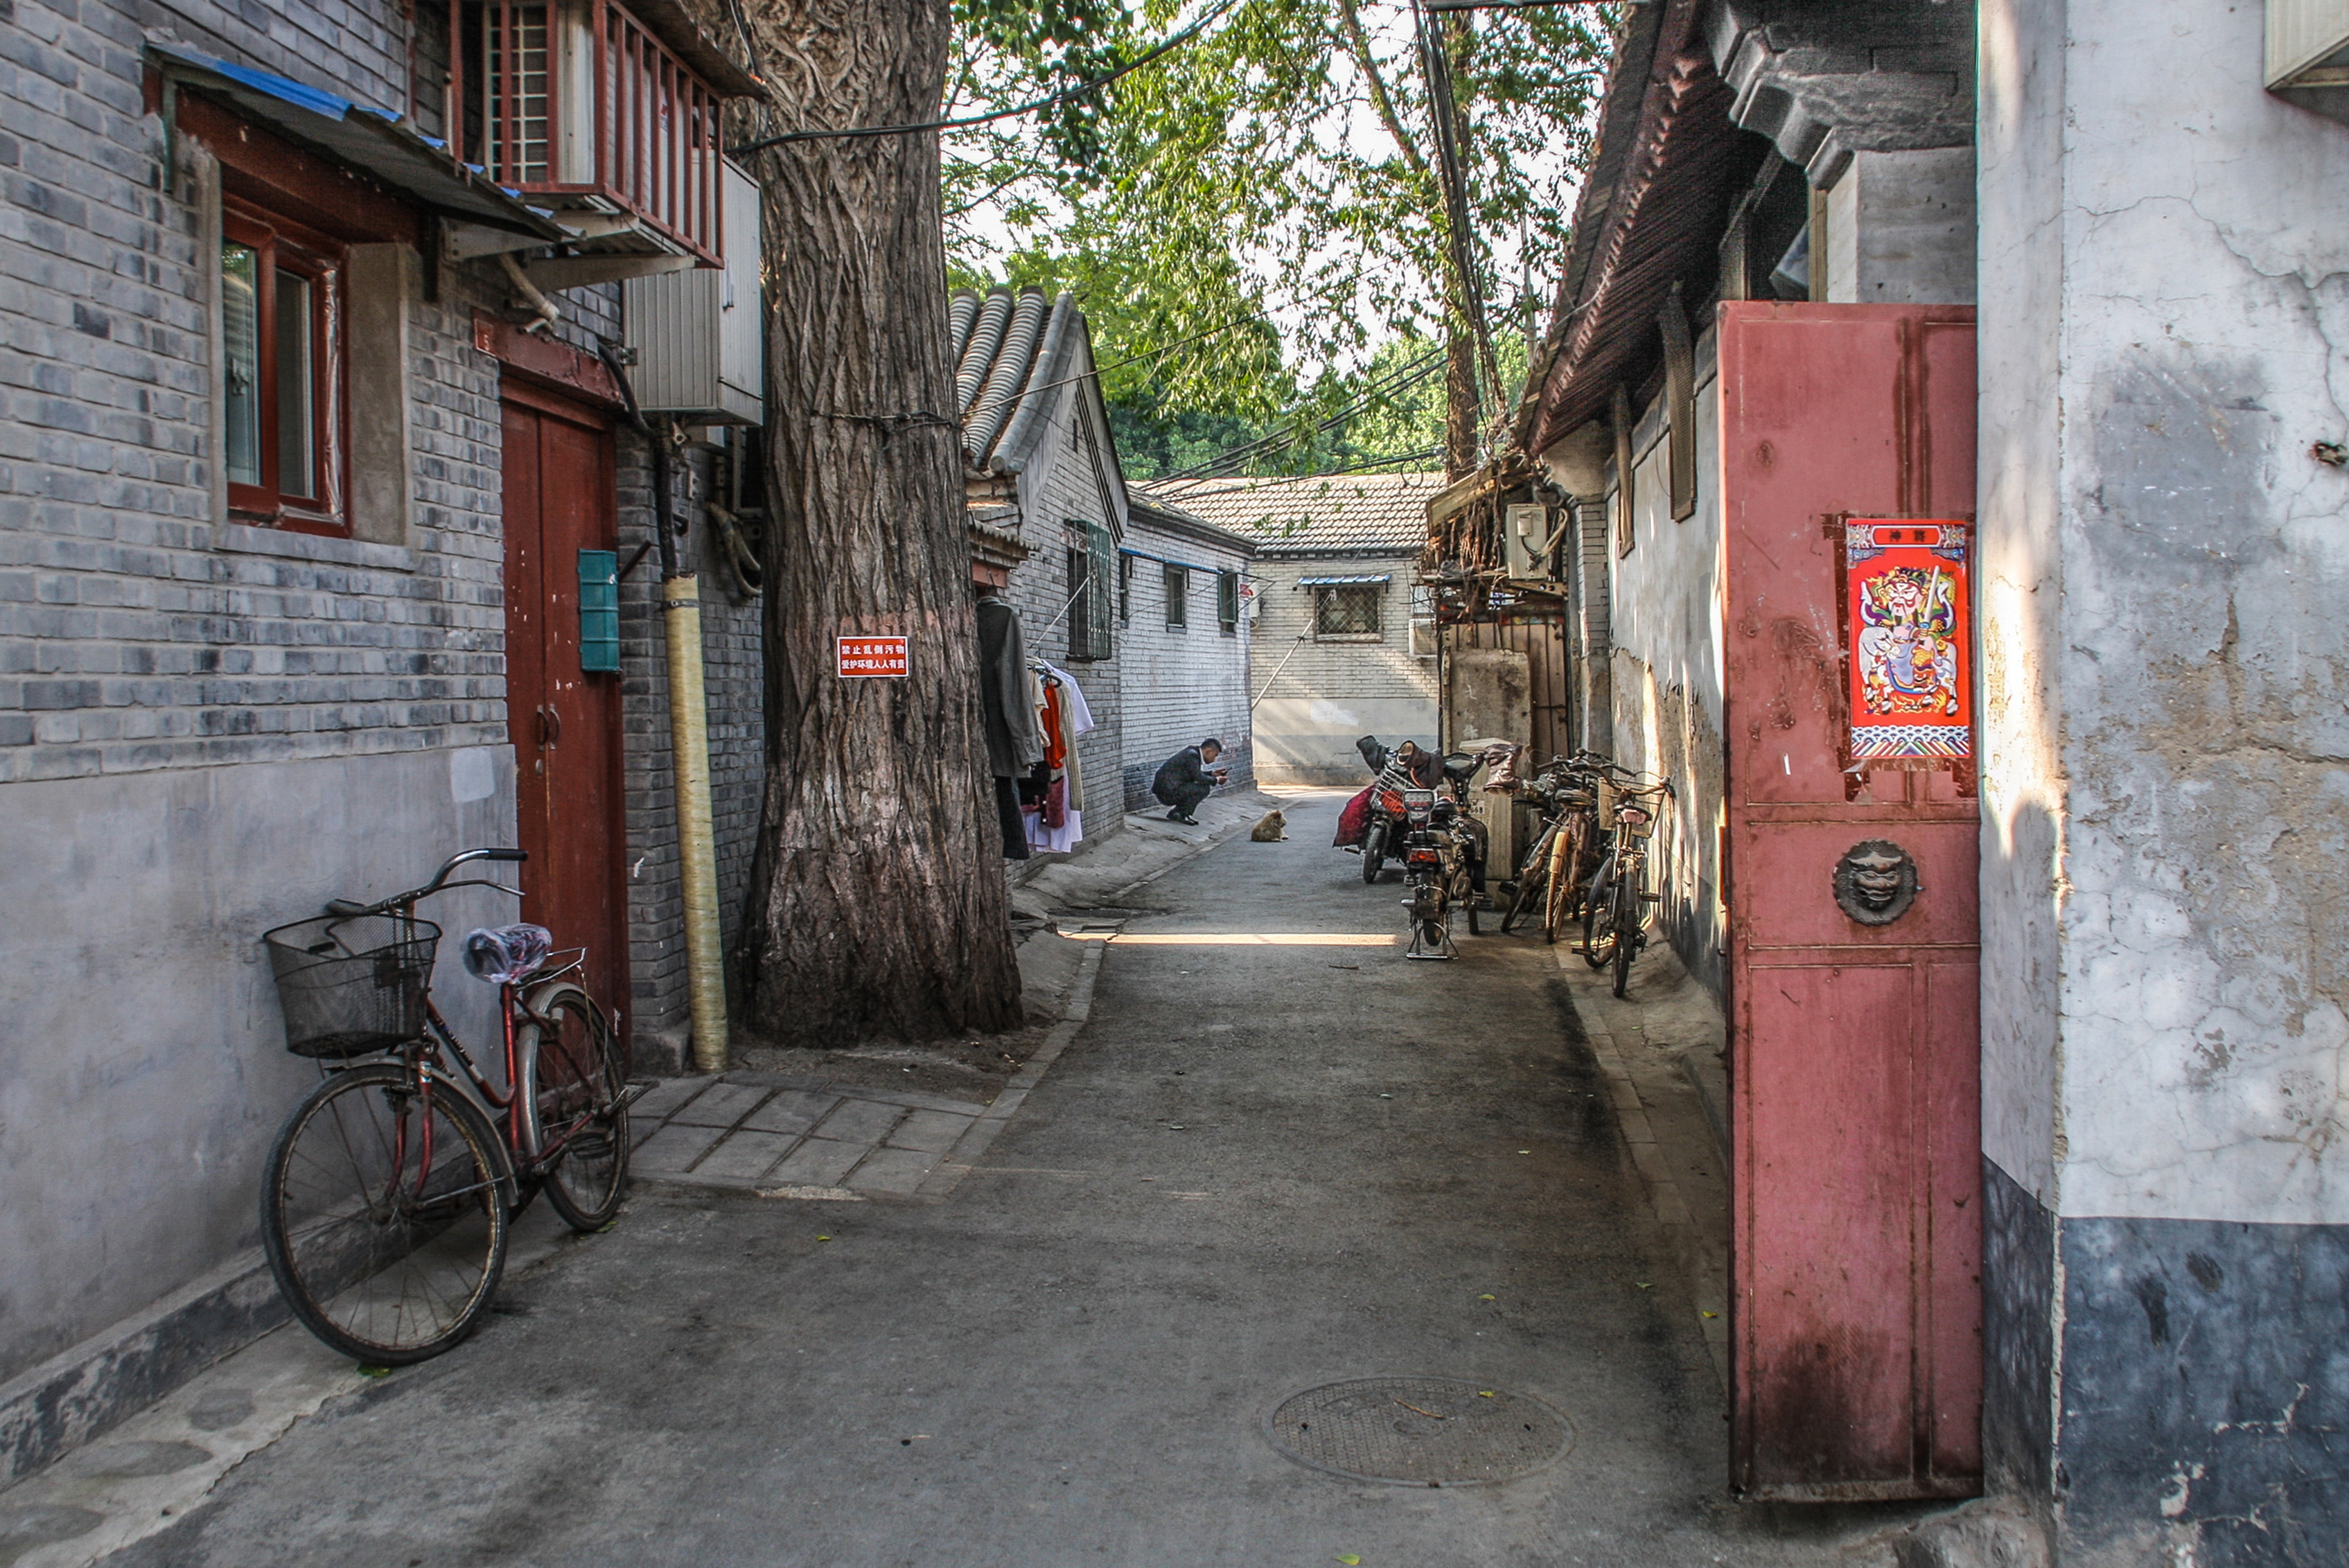 Hutong alleys: the soul of Old Beijing - ARCHITECTURE ON THE ROAD